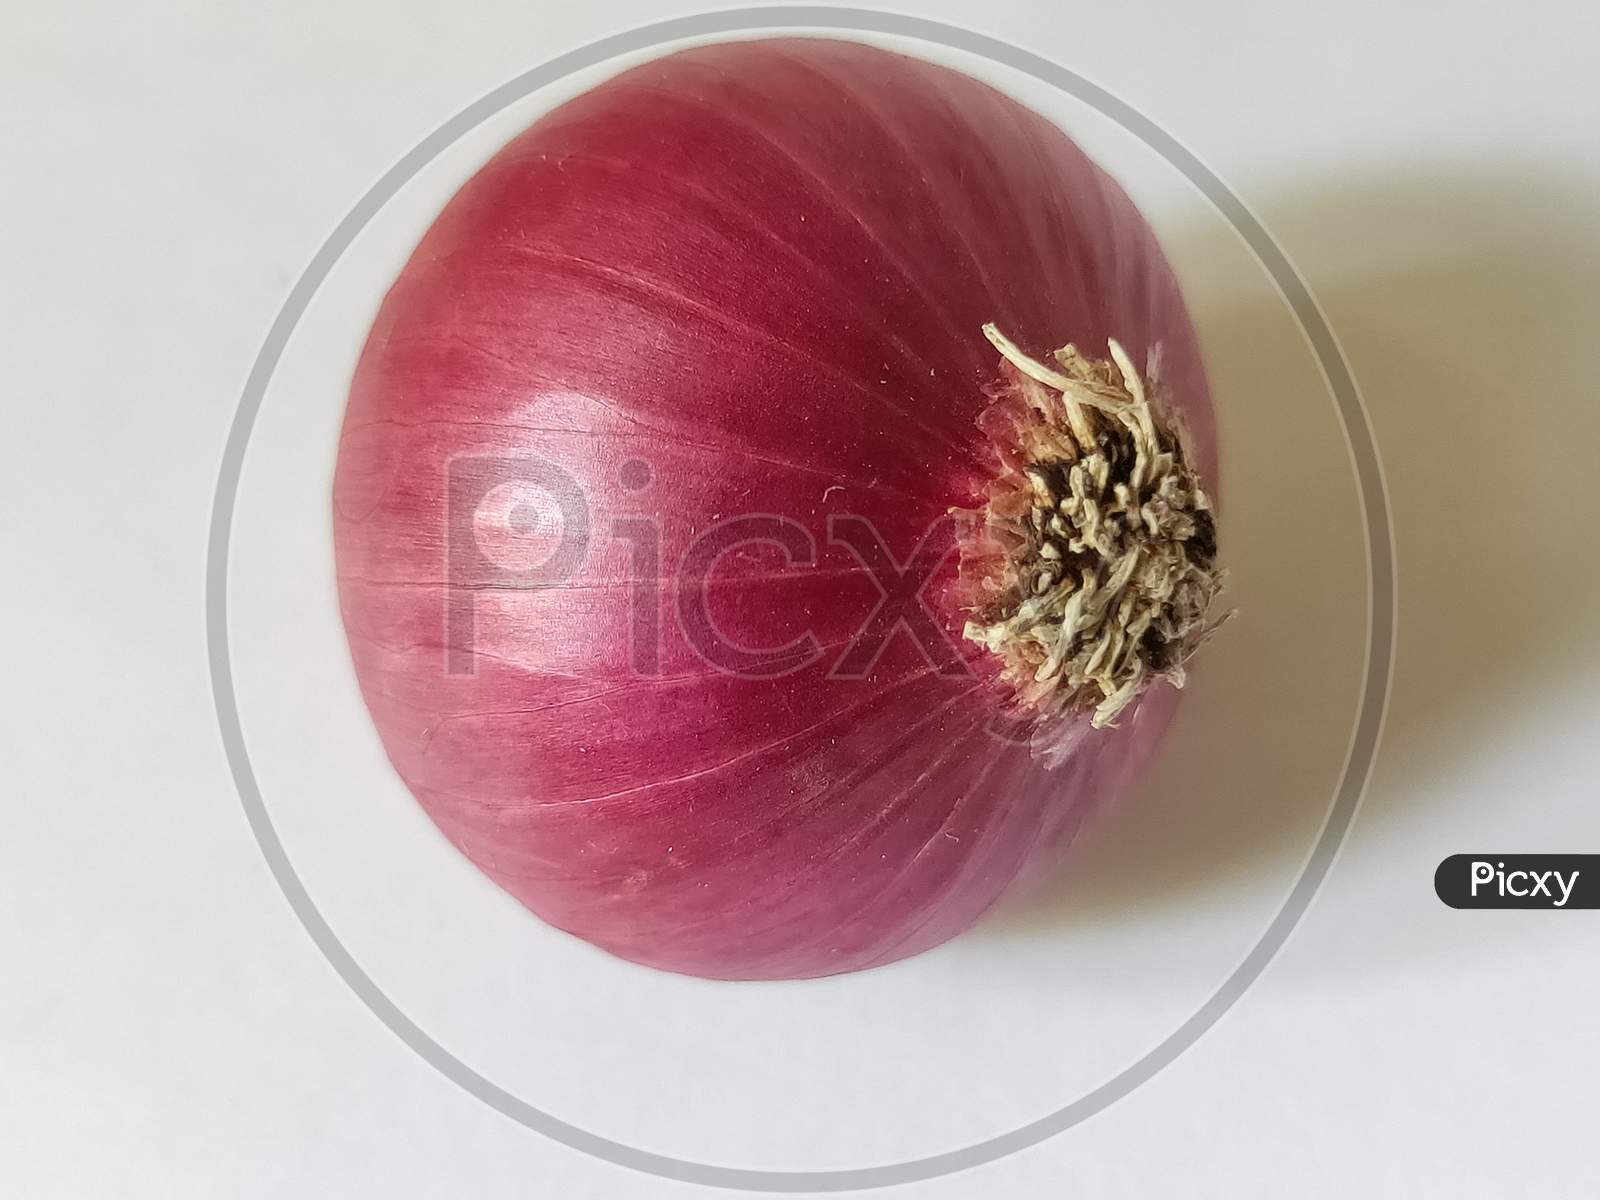 Onion on white background. Red onion on plain background. Fresh Vegetable close up view.